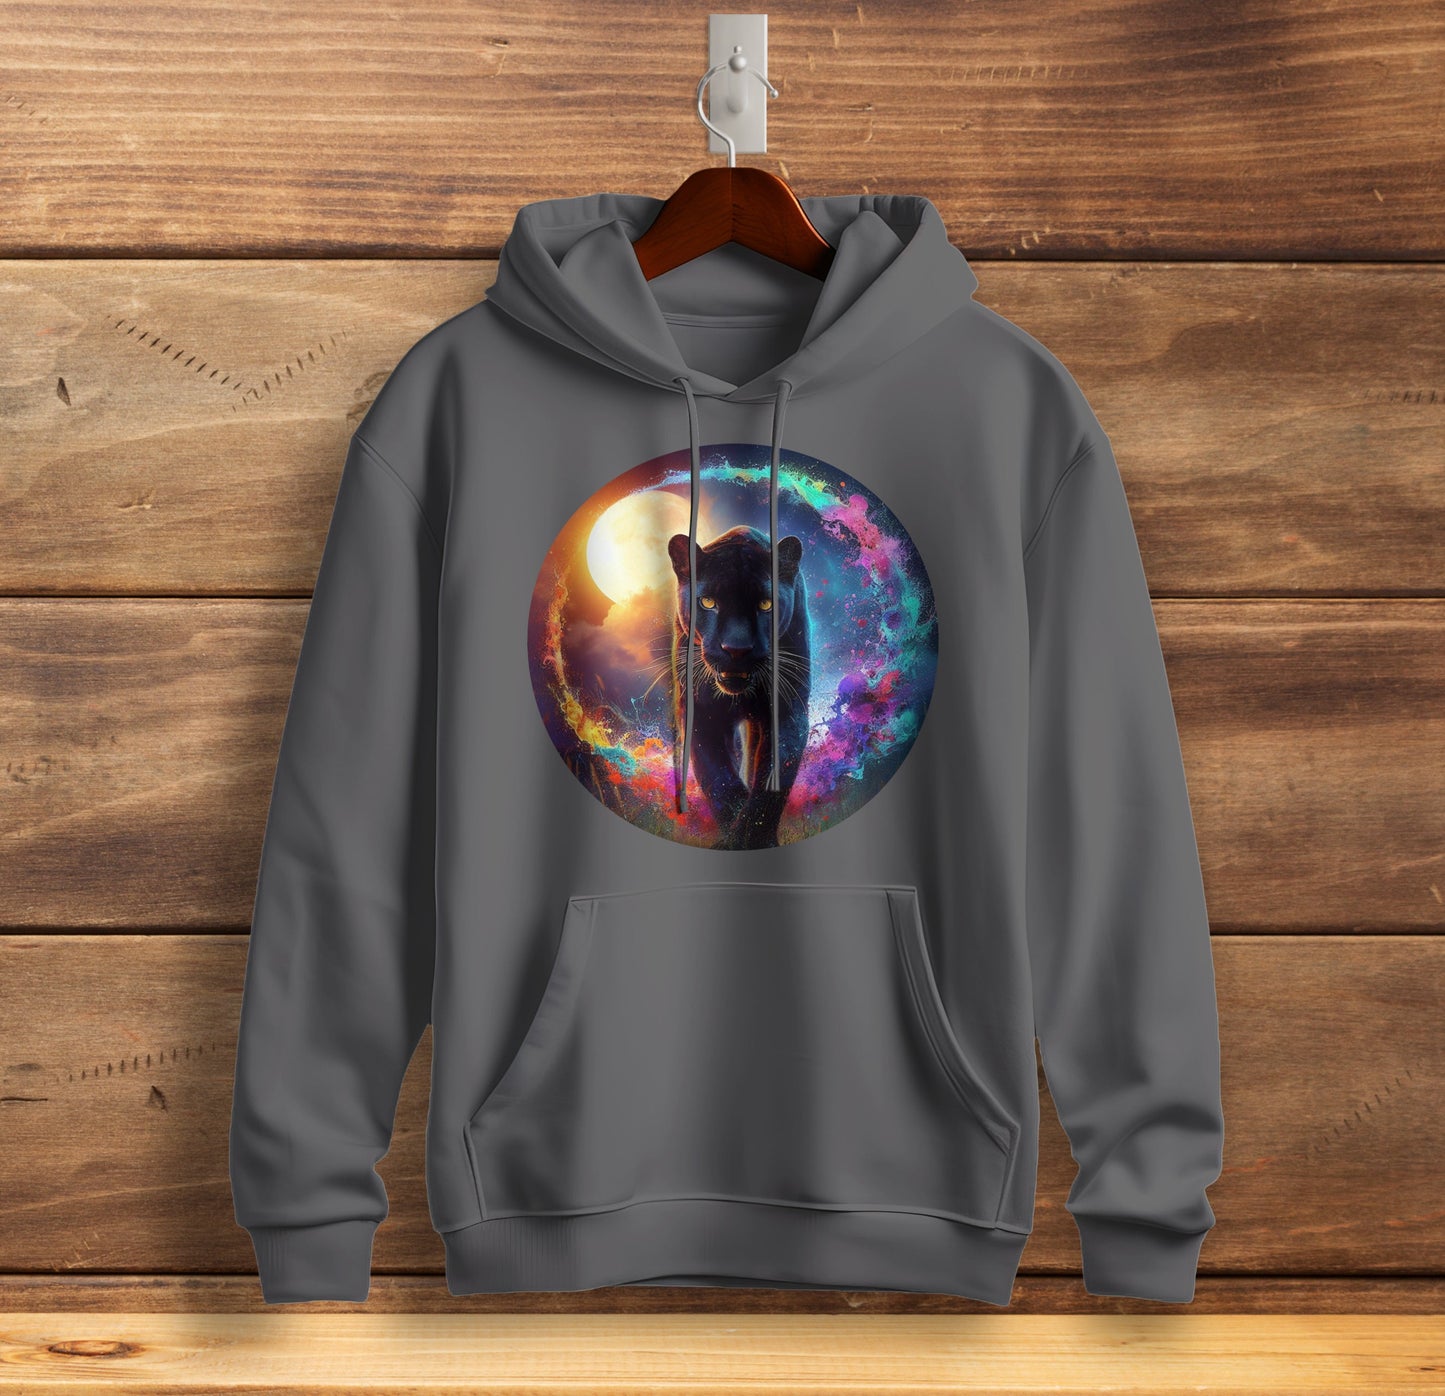 The Bold Black Panther - Graphic Printed Hooded Sweat Shirt for Men - Cotton - Magnificence of India Sweat Shirt